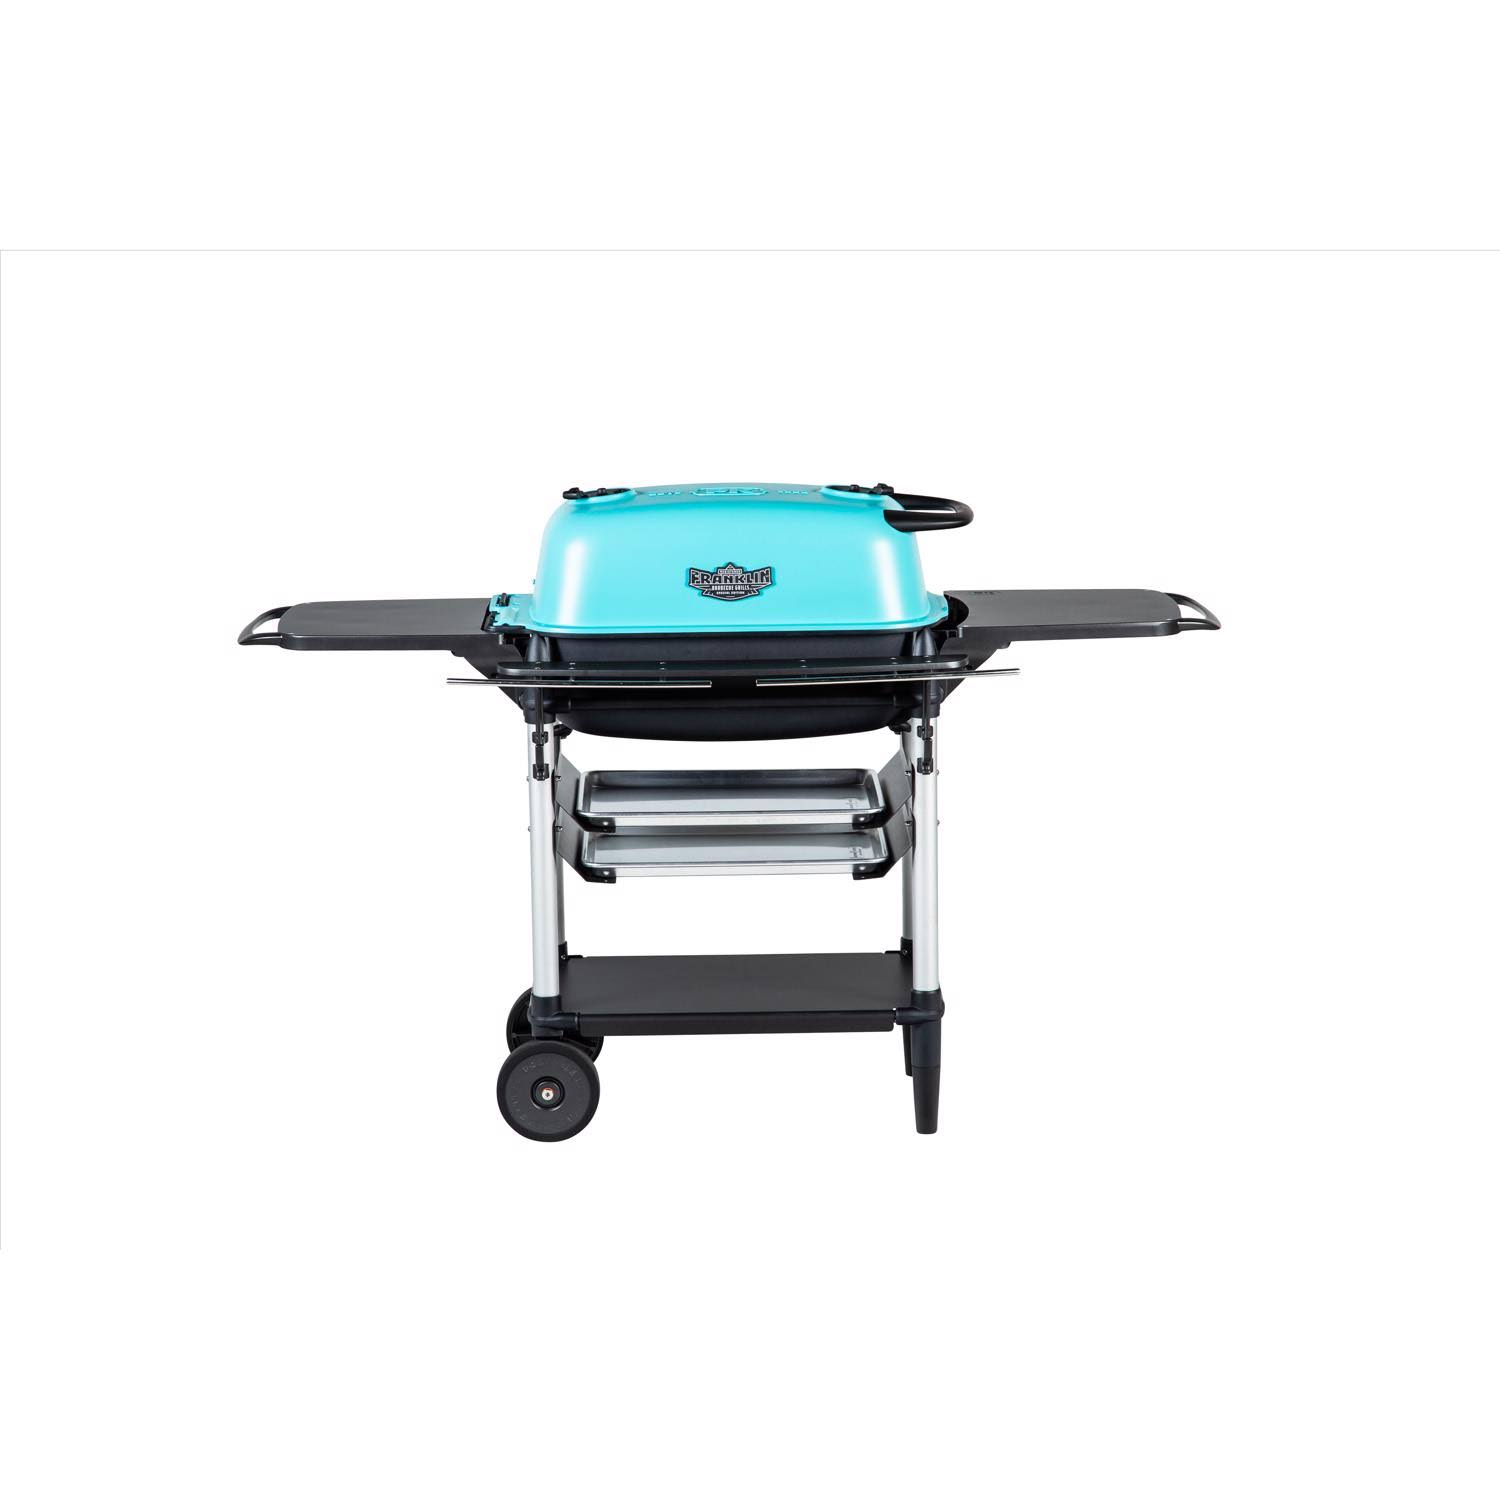 PK Grills Grill and Smoker 22" PK300 Aaron Franklin Charcoal Teal Teal PK300AF-TC